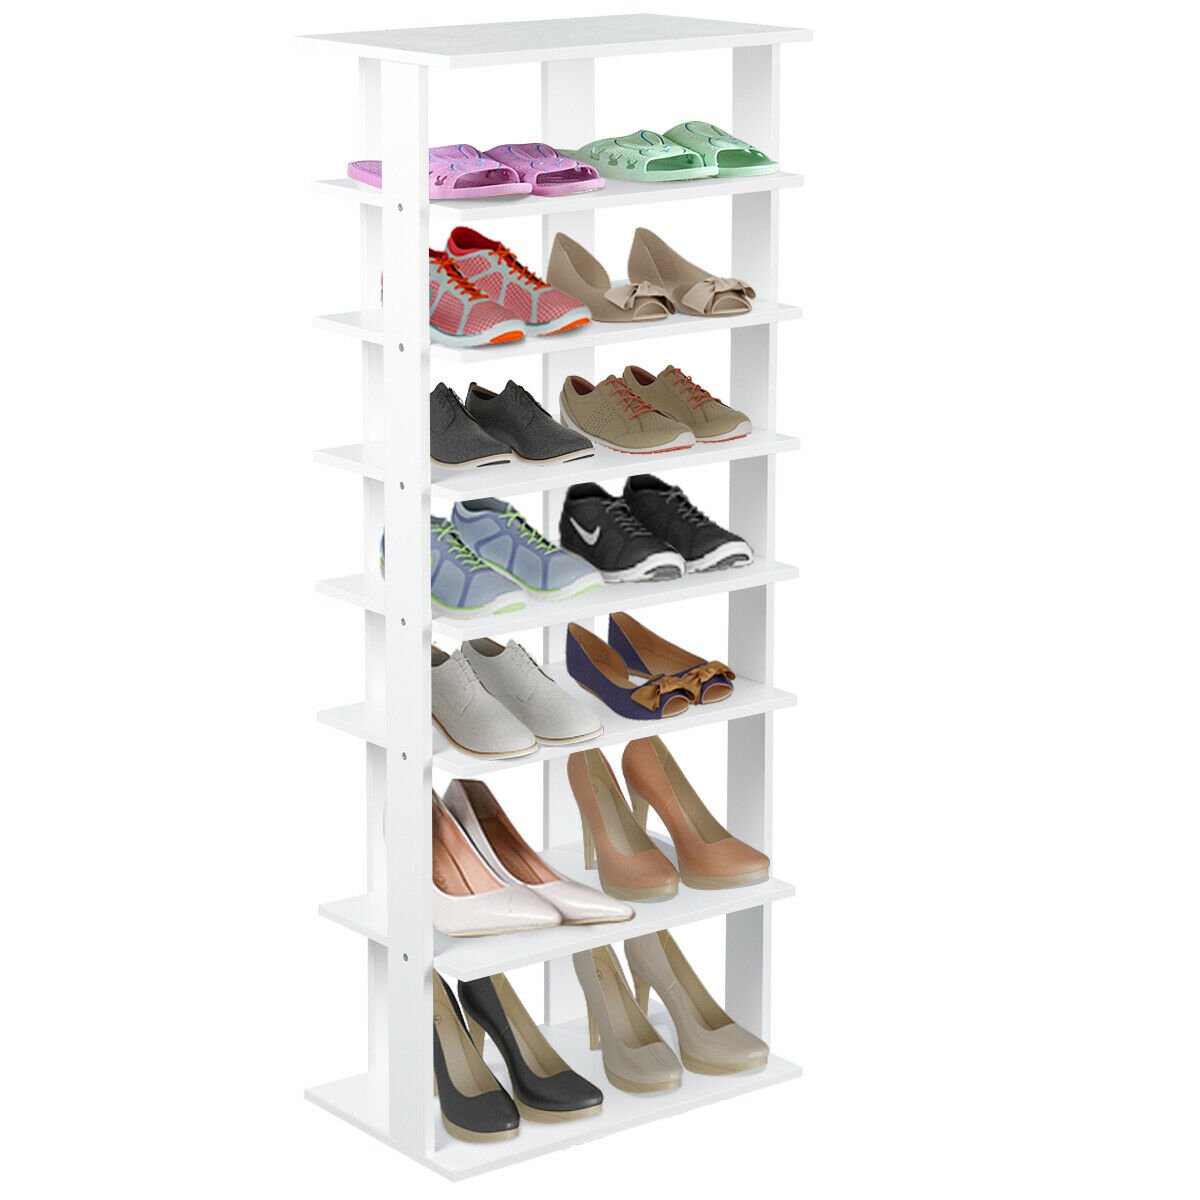 Patented Wooden Shoes Storage Stand 7 Tiers Big Shoe Rack Organizer Multi-Shoe Rack